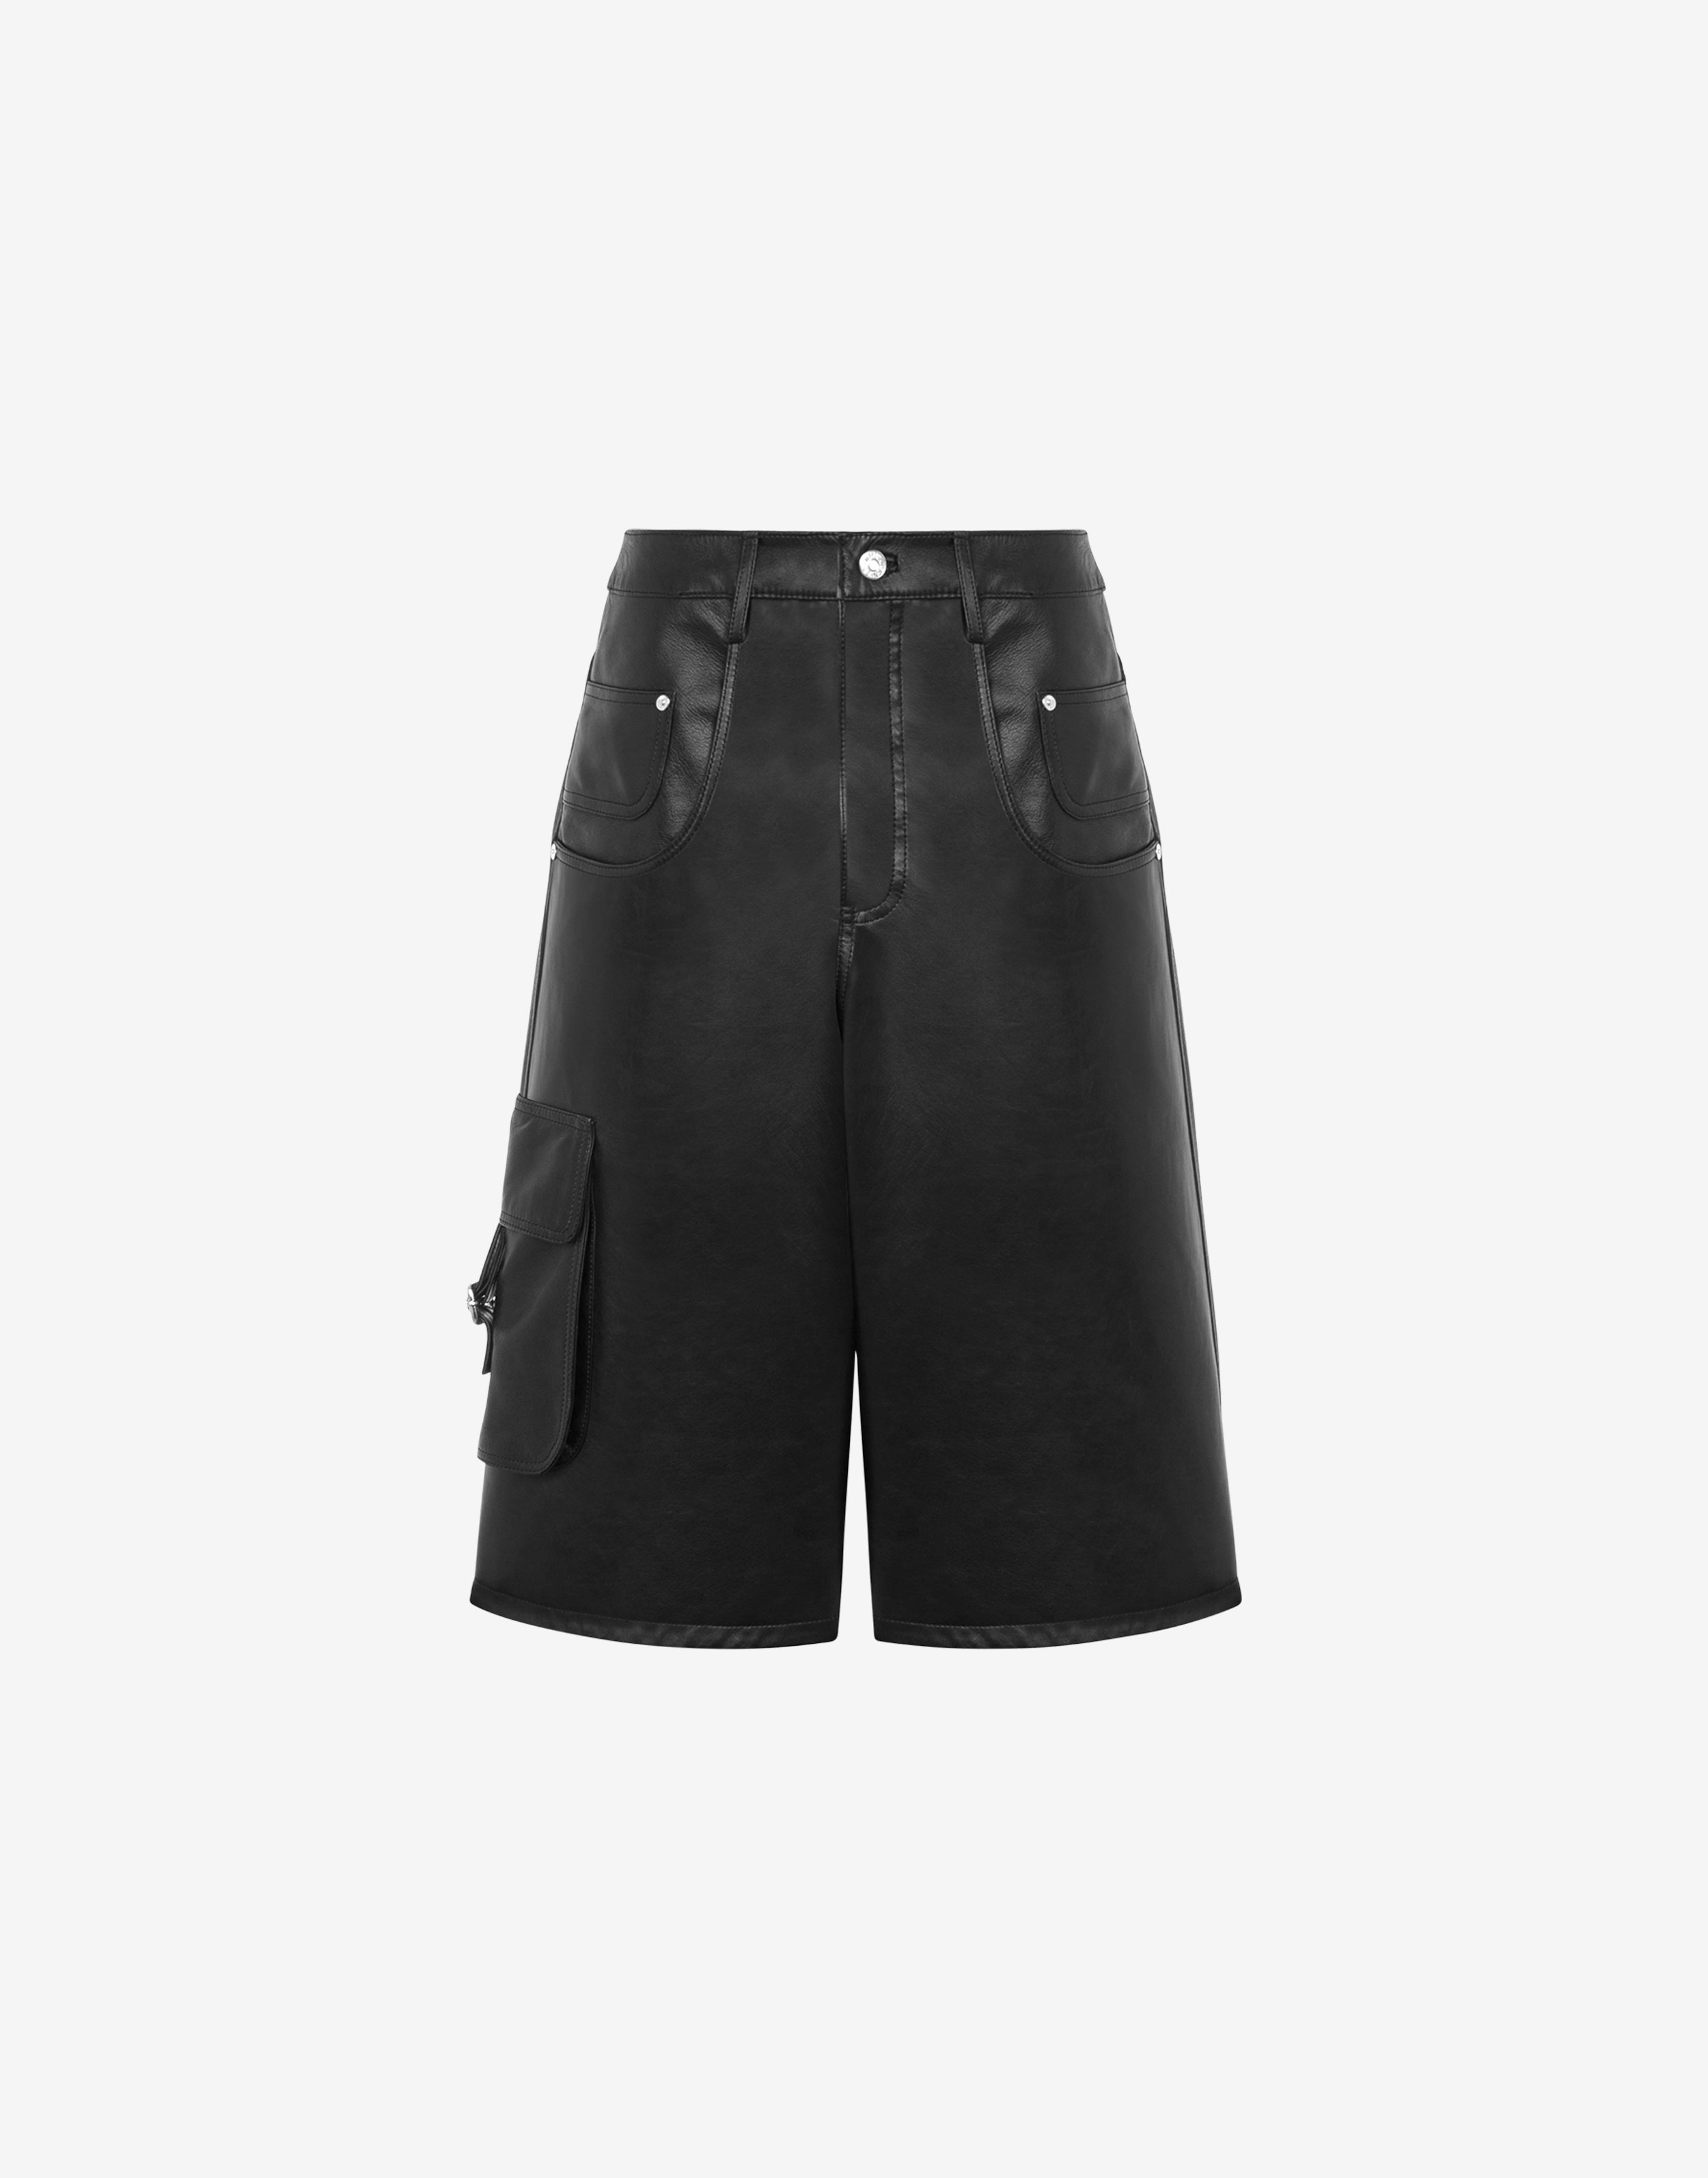 Moschino Shorts for Women, Online Sale up to 87% off